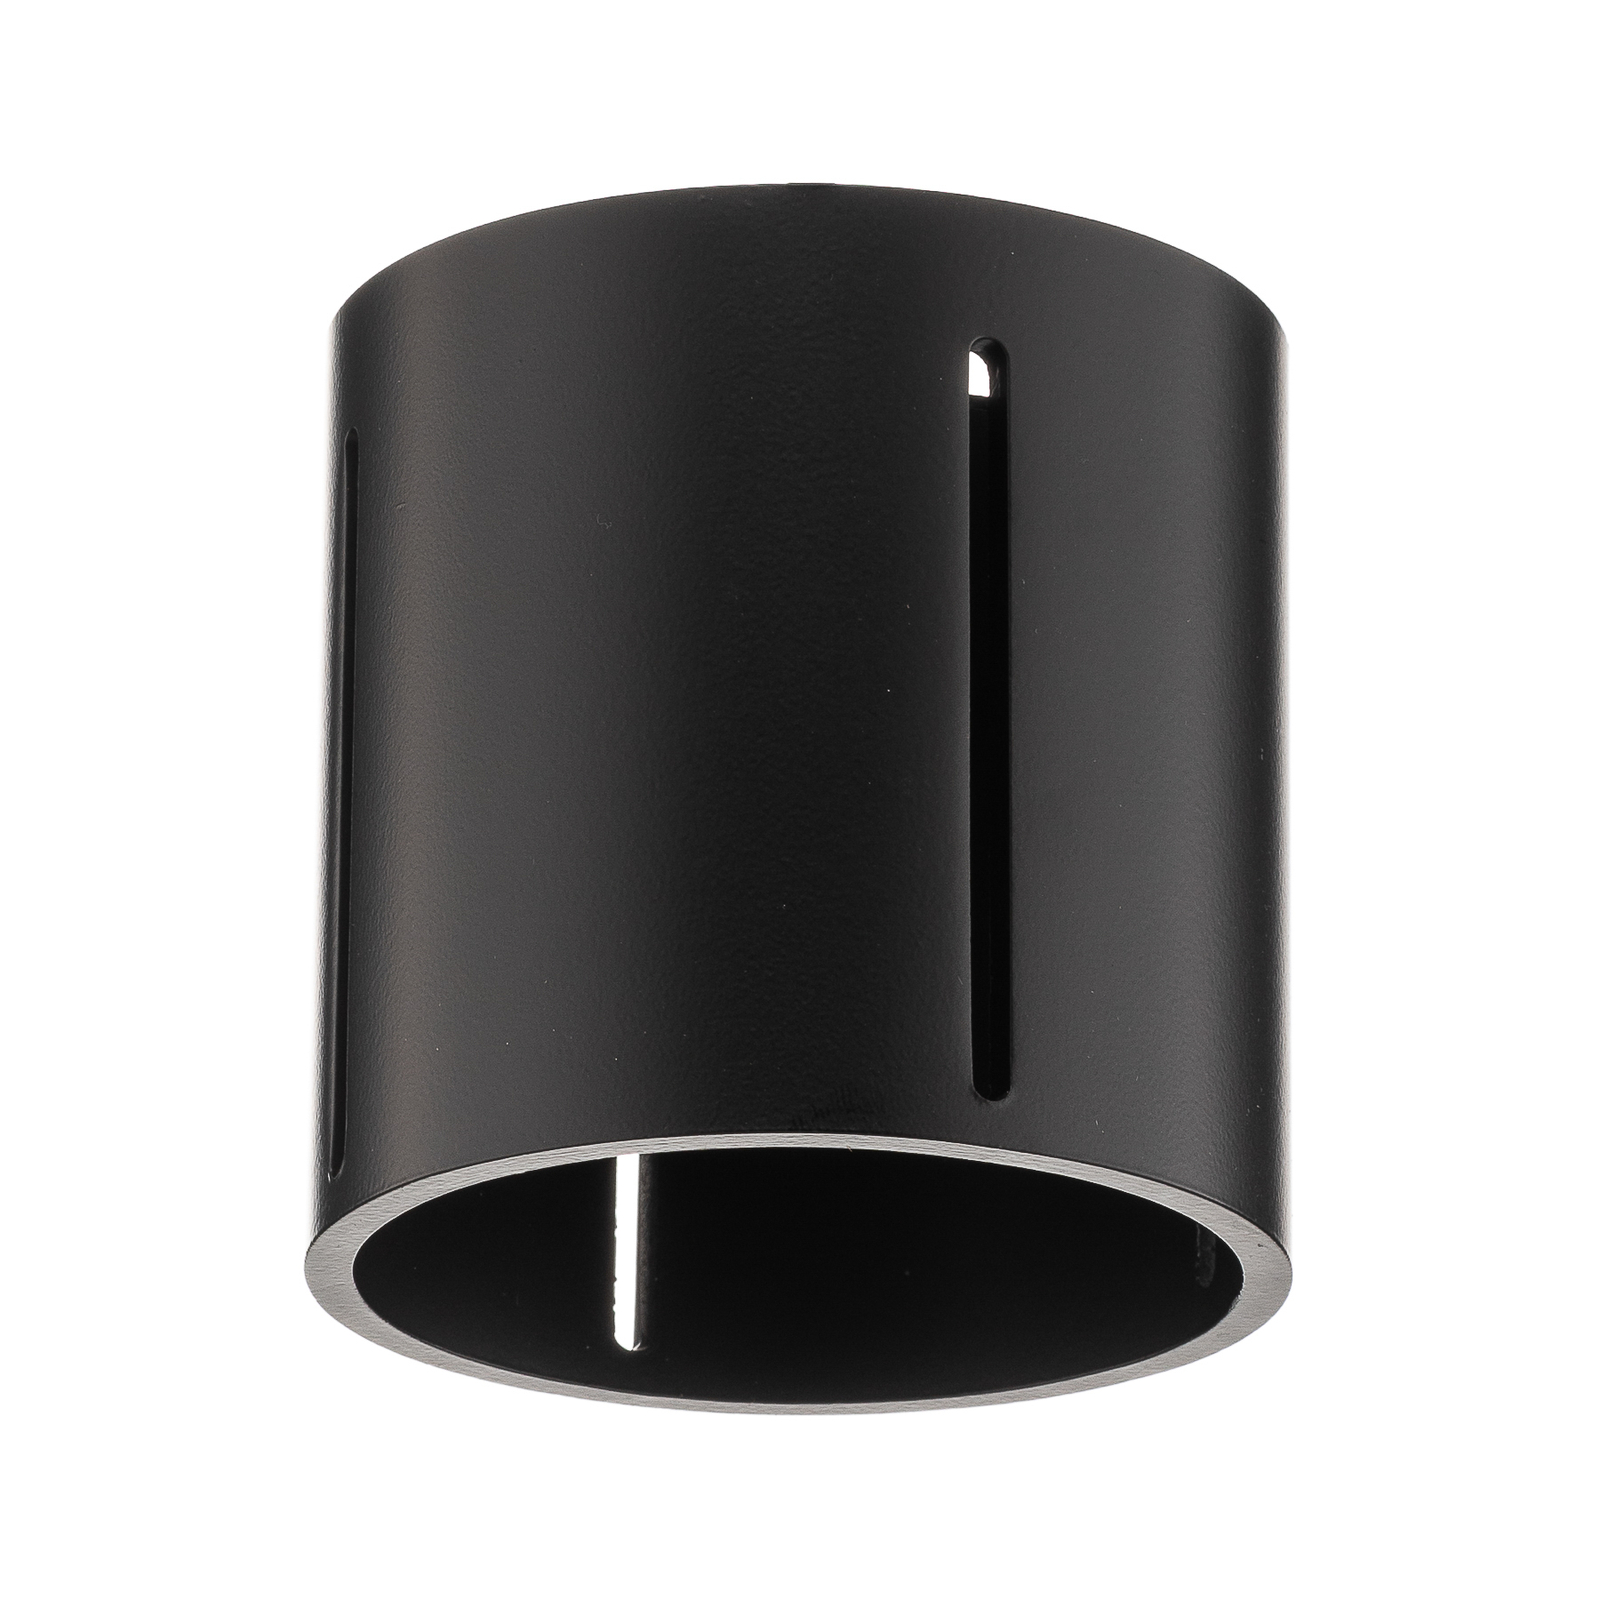 Topa ceiling light as a black cylinder